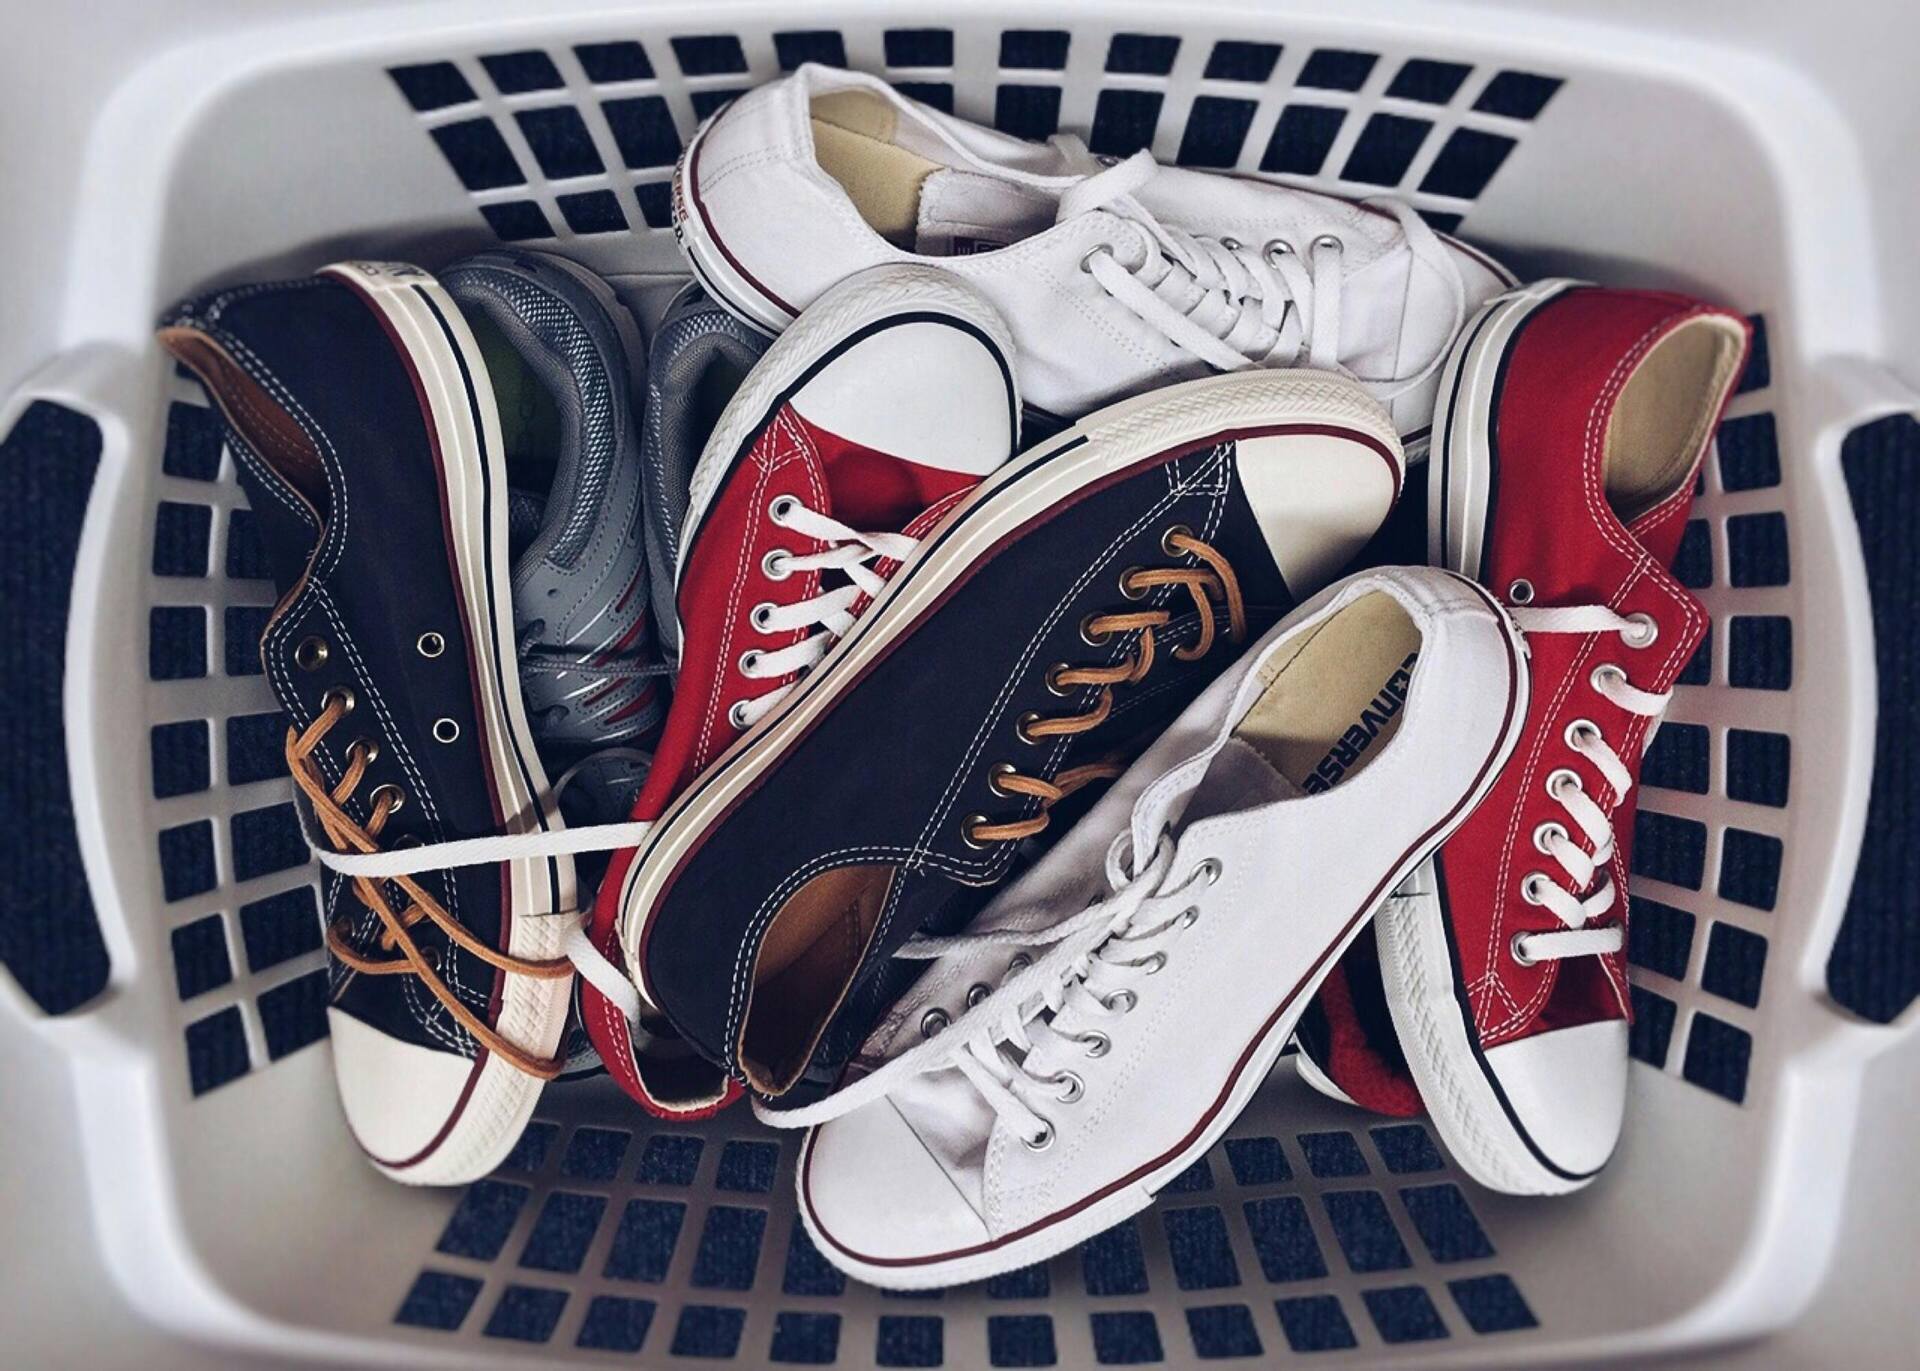 Several pairs of shoes and sneakers in a plastic basket